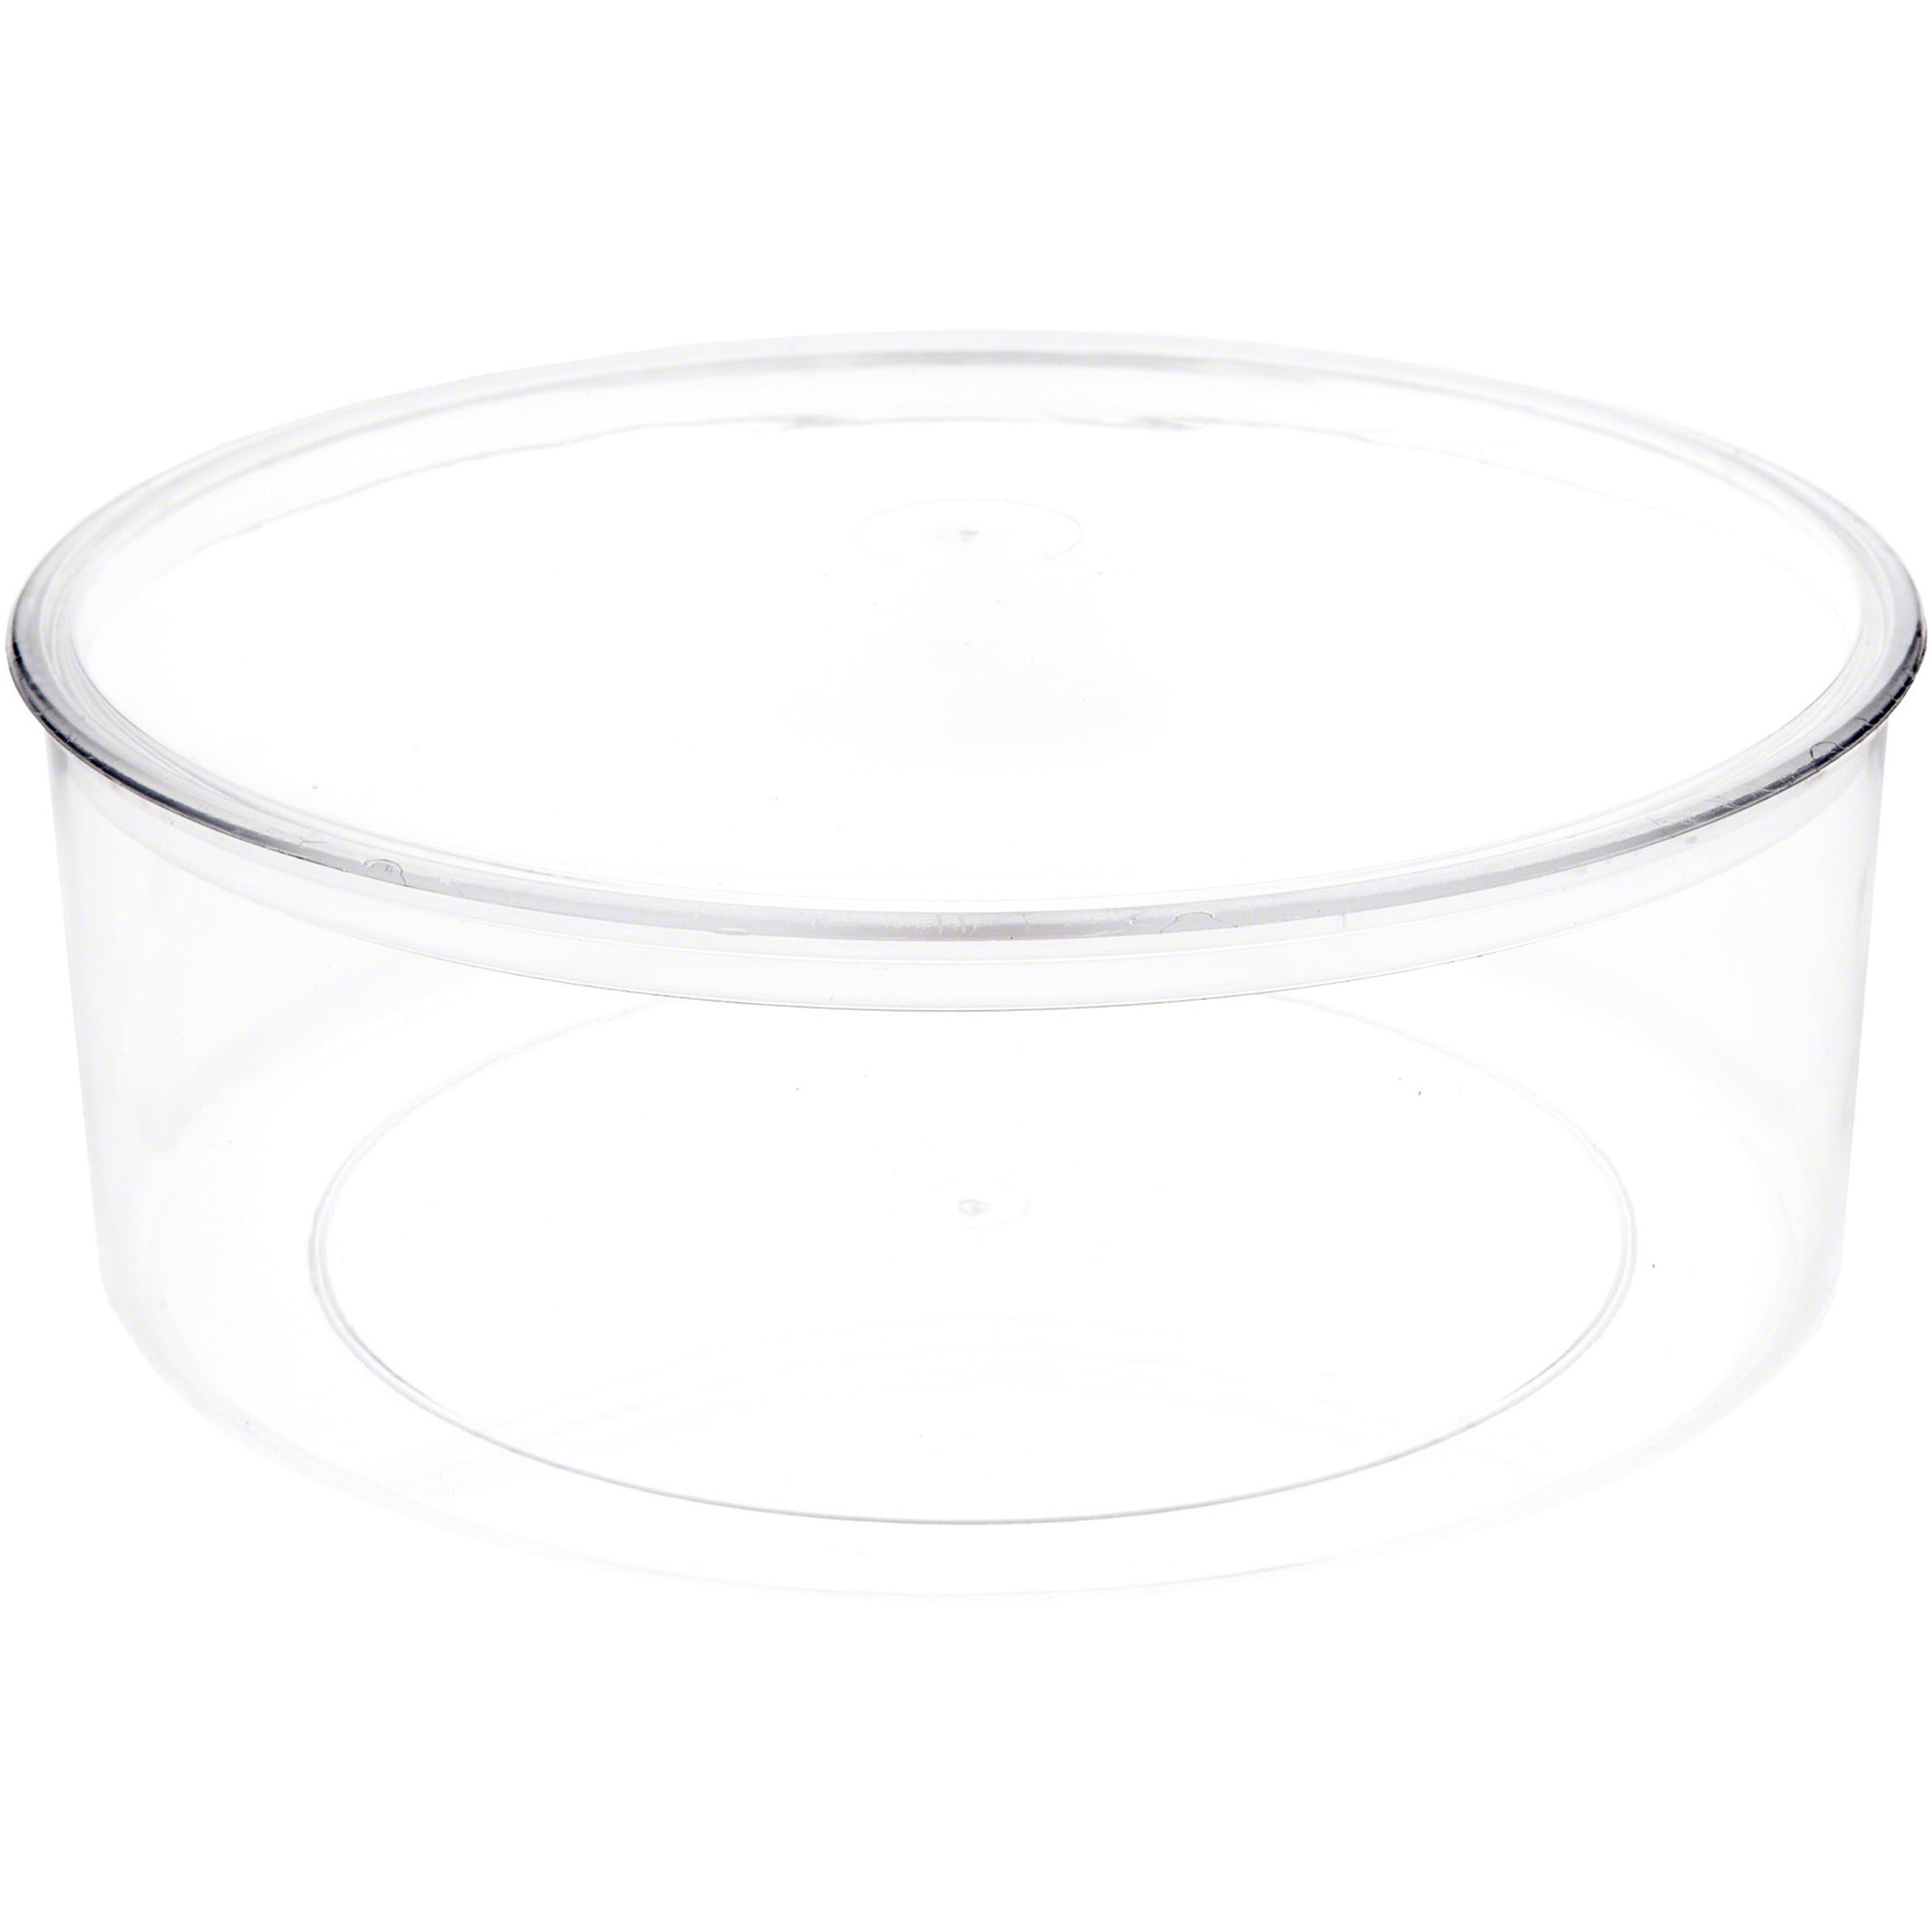 Pioneer Plastics 240C Clear Large Round Plastic Container, 8 W x 3 H,  Pack of 2